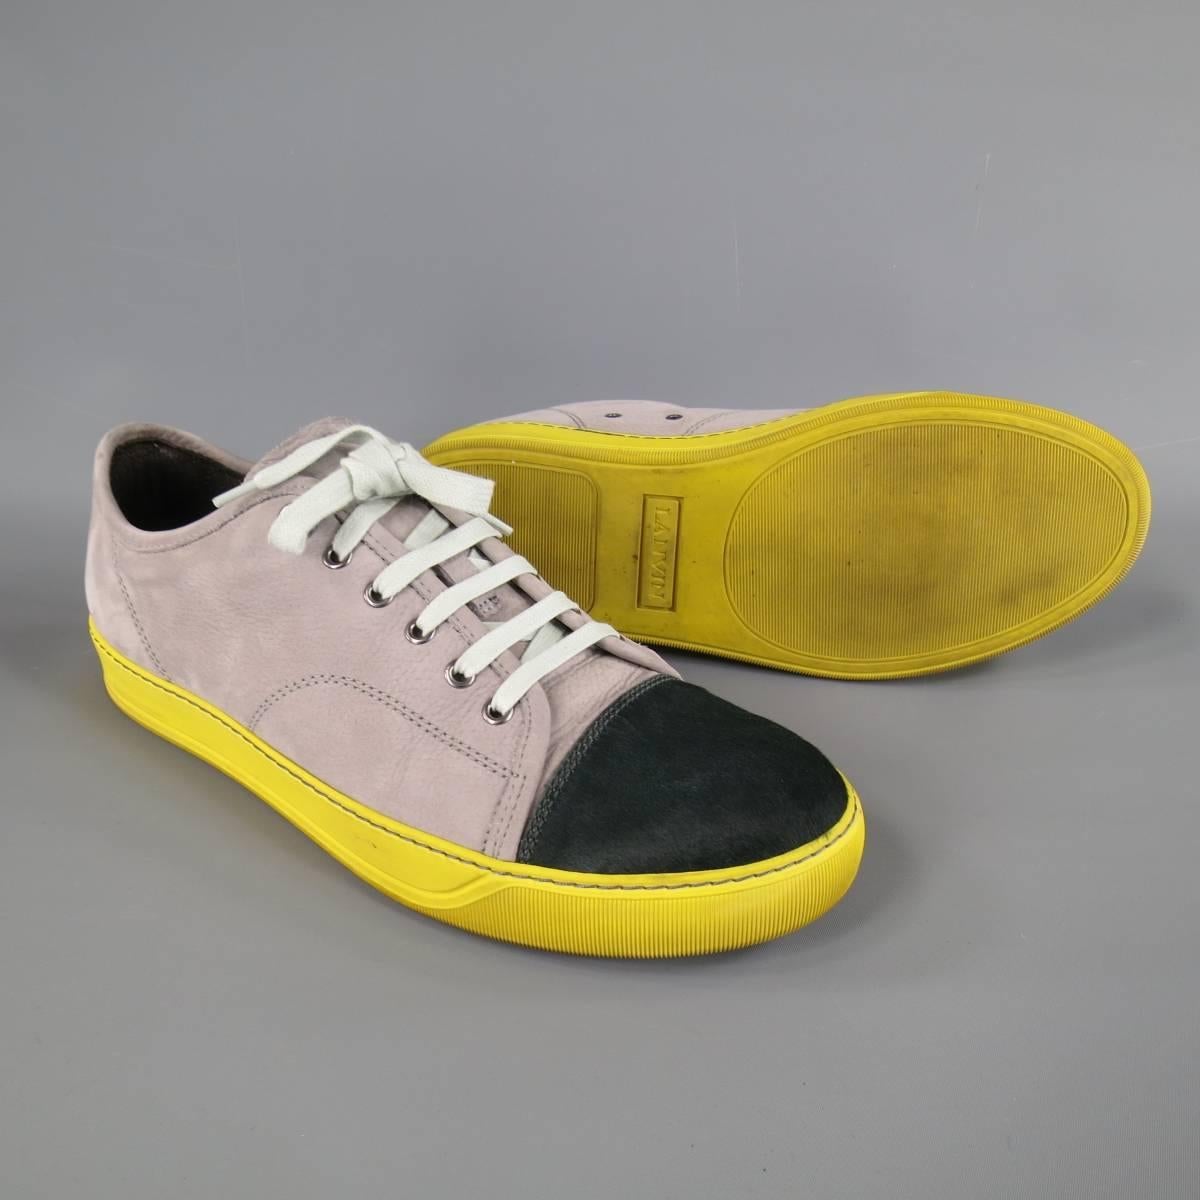 These LANVIN tennis sneakers comes in a matte taupe gray leather with a deep green pony hair leather toe cap, mint laces, and yellow rubber sole. Made in Portugal. Retails: $620.
 
Excellent Pre-Owned Condition.
Marked: UK 8
 
Insole: 11.75 x 4